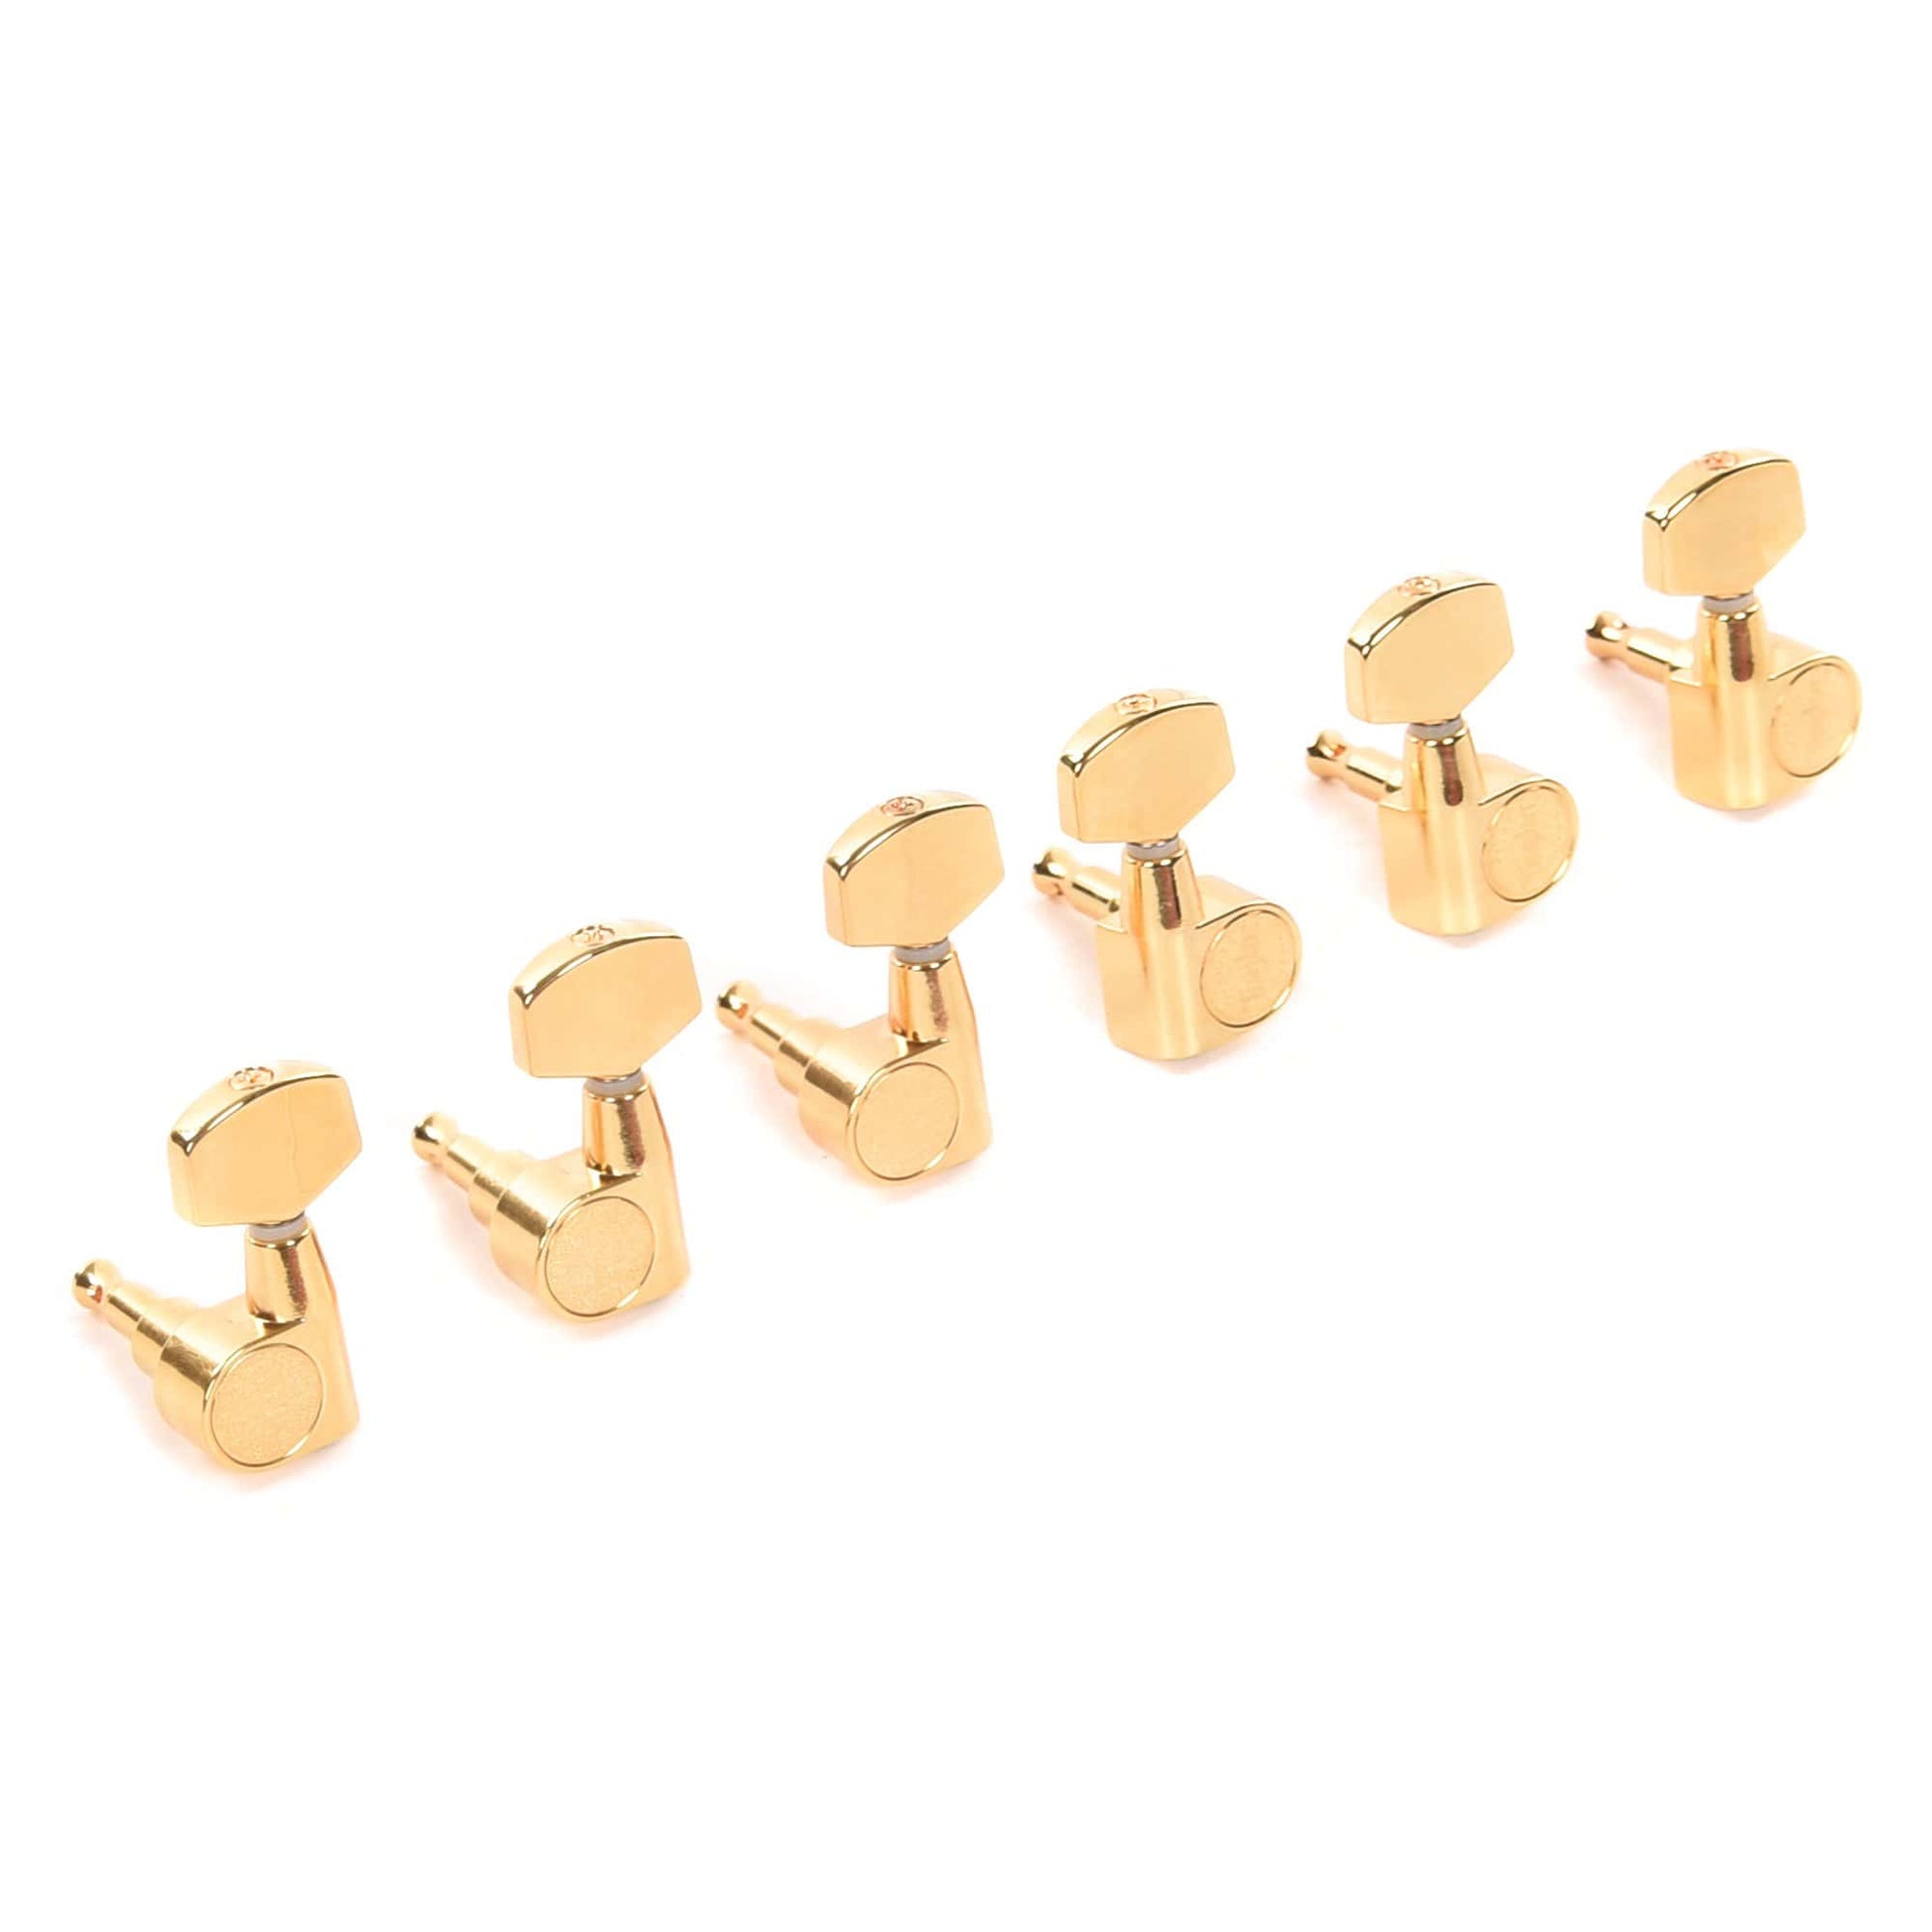 Taylor Guitar Tuners 1:18 6-String Polished Gold Parts / Tuning Heads